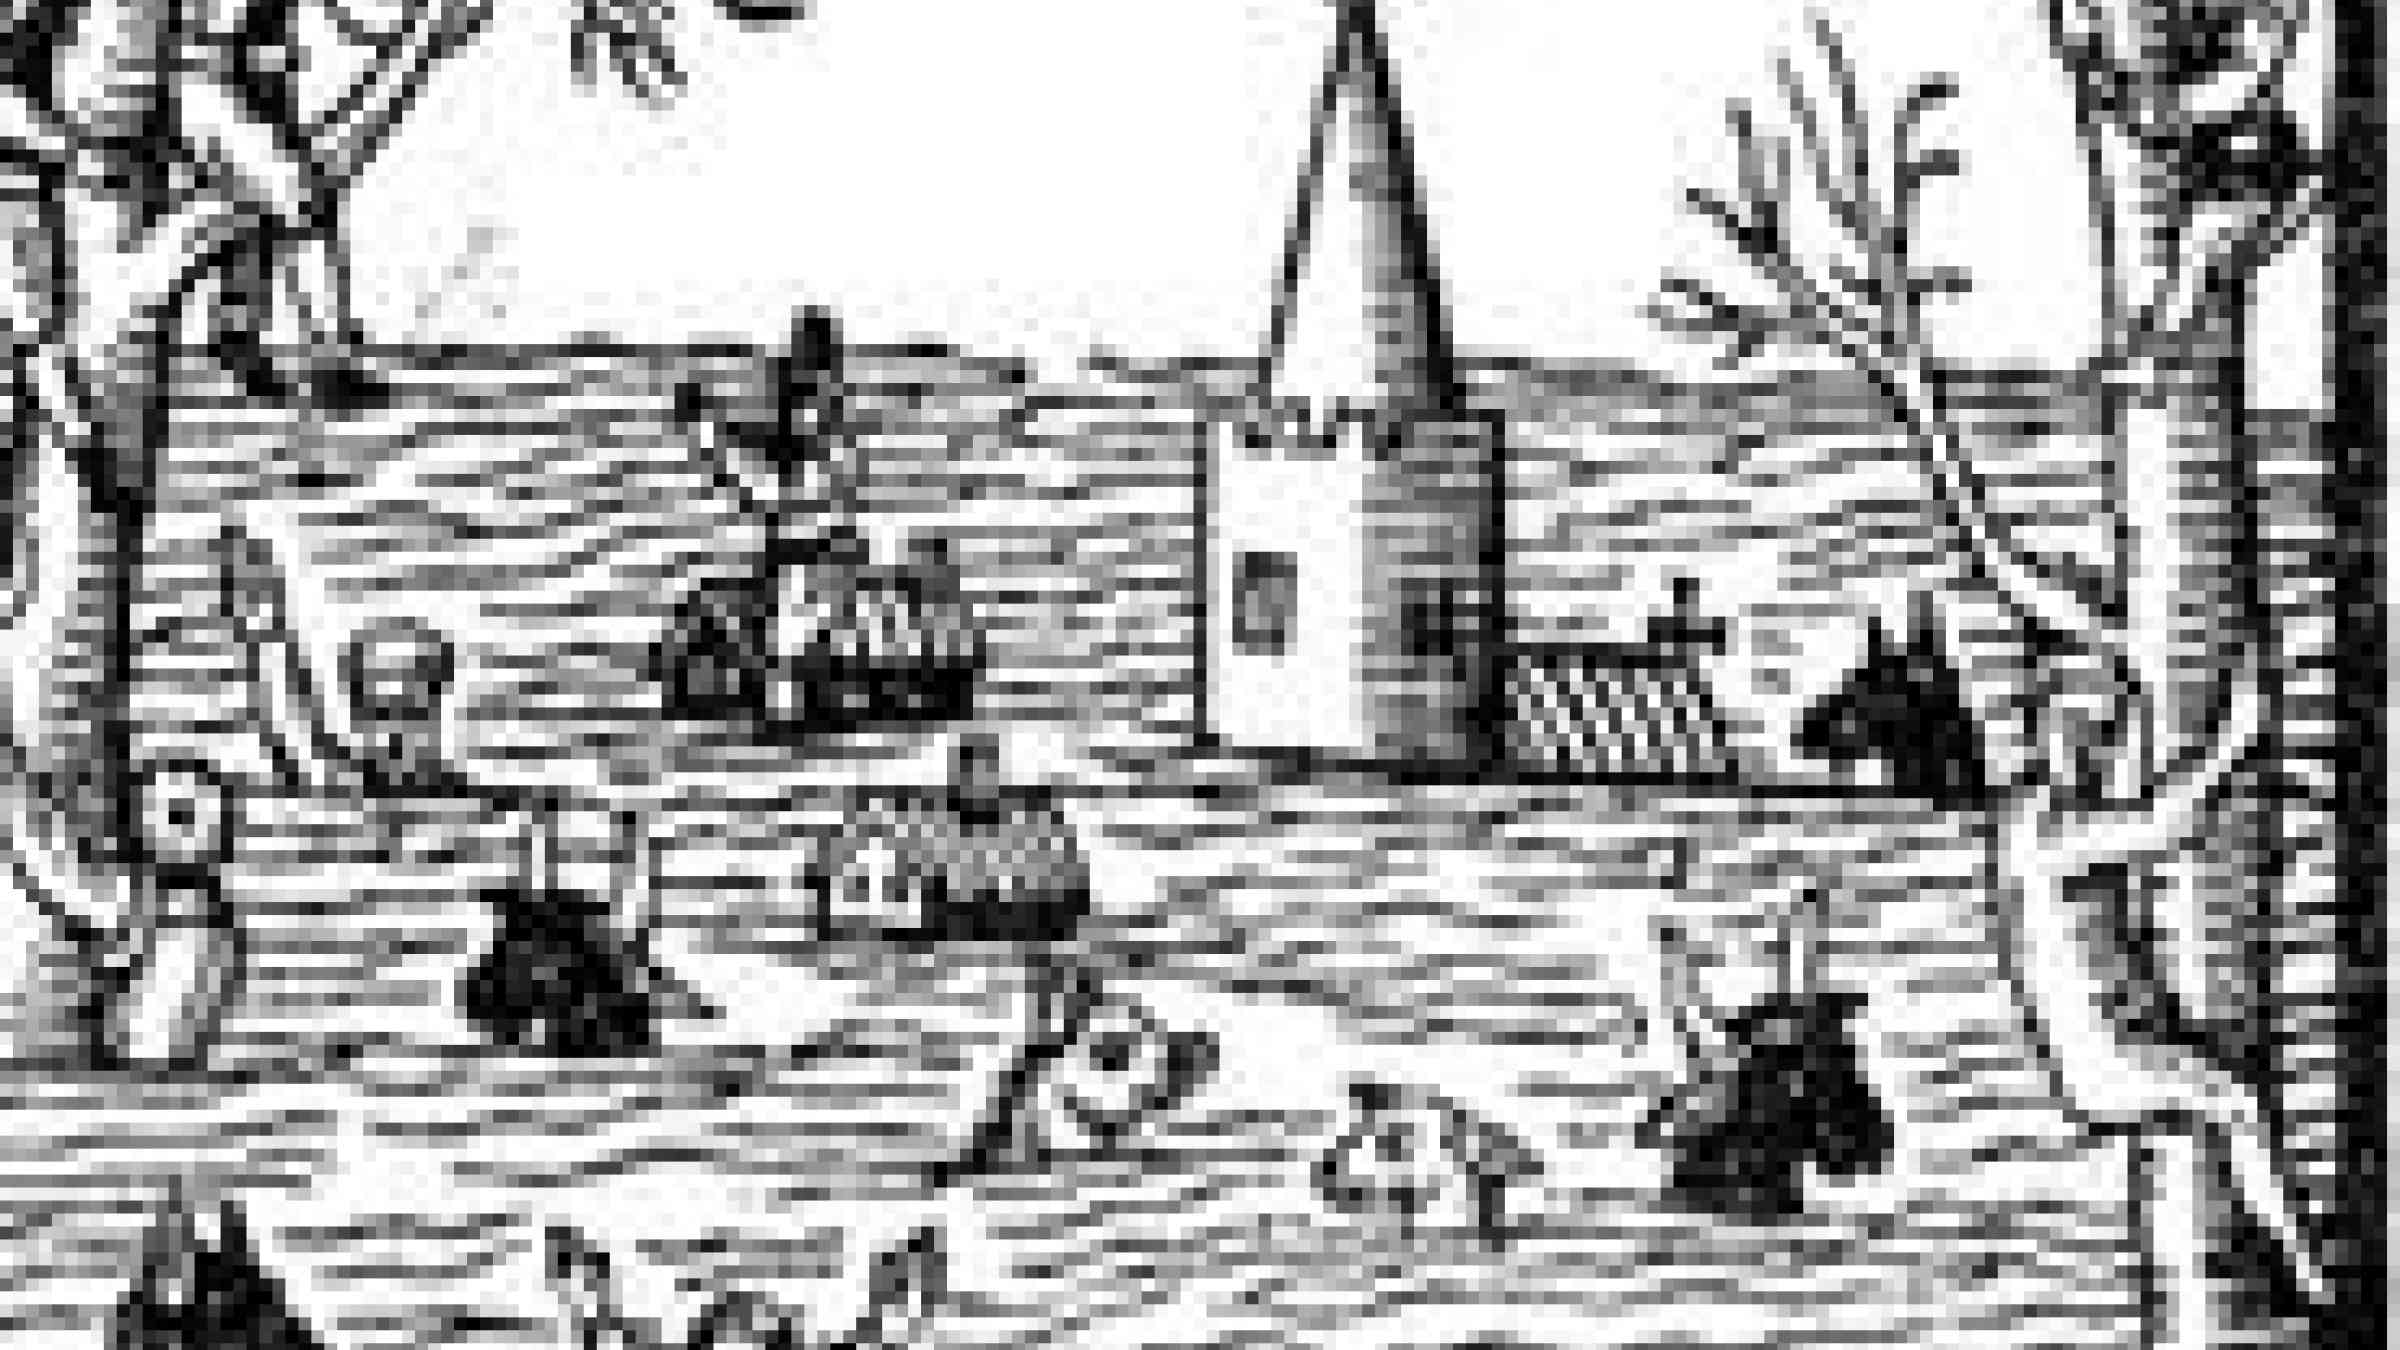 Flood in Britain, 1607 http://theconversation.com/total-flood-defence-is-a-myth-we-must-learn-to-live-with-the-water-22670